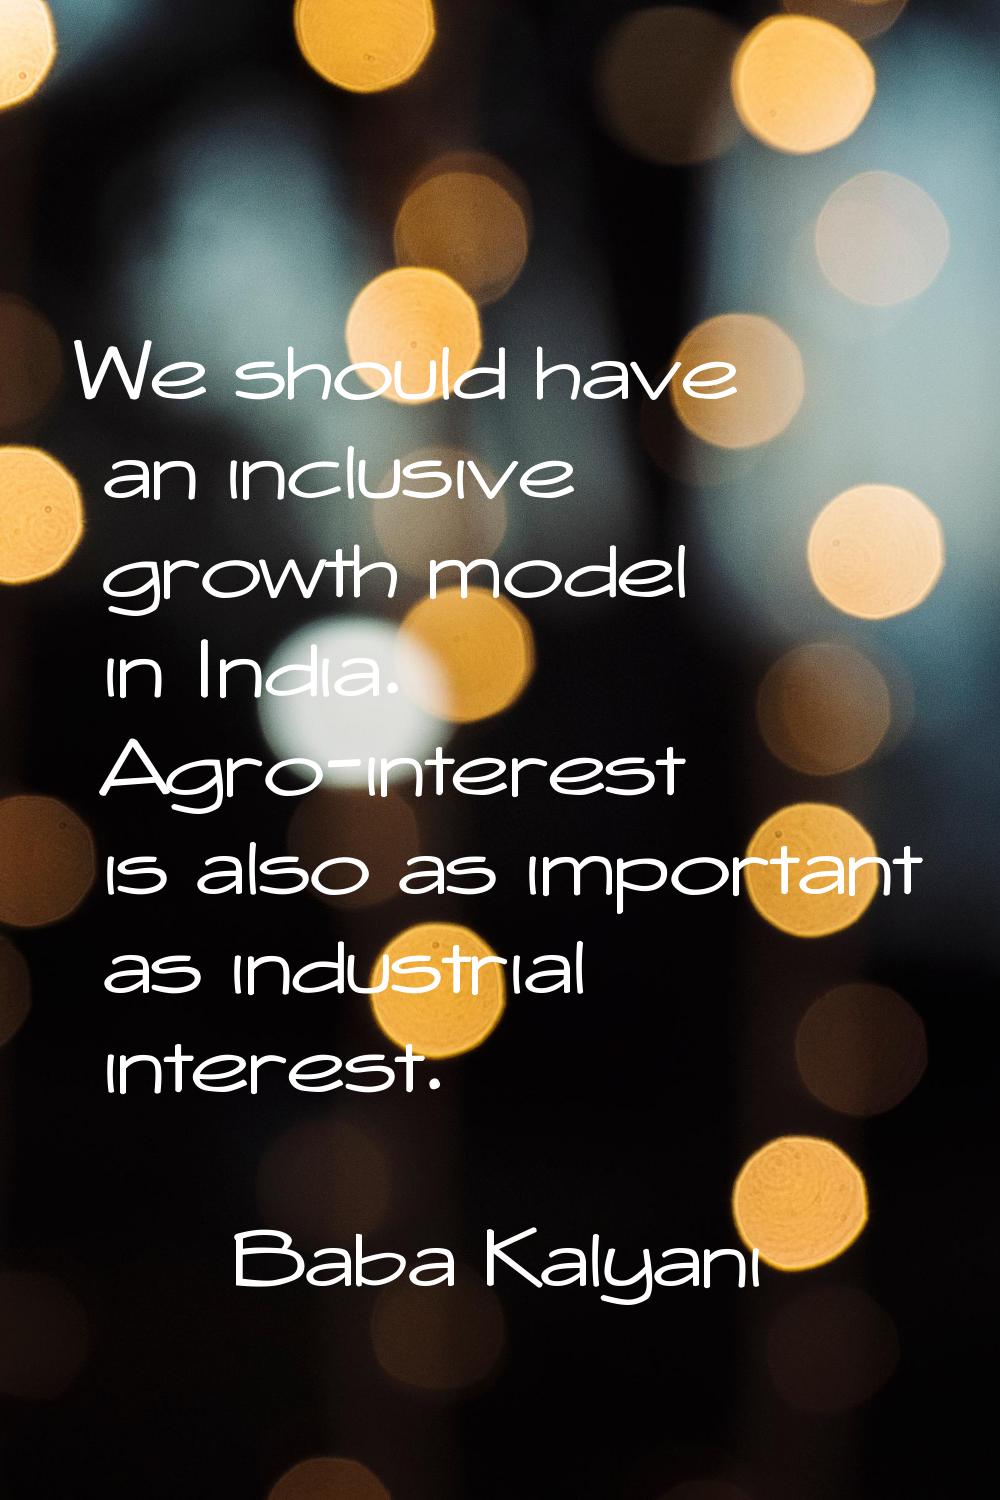 We should have an inclusive growth model in India. Agro-interest is also as important as industrial